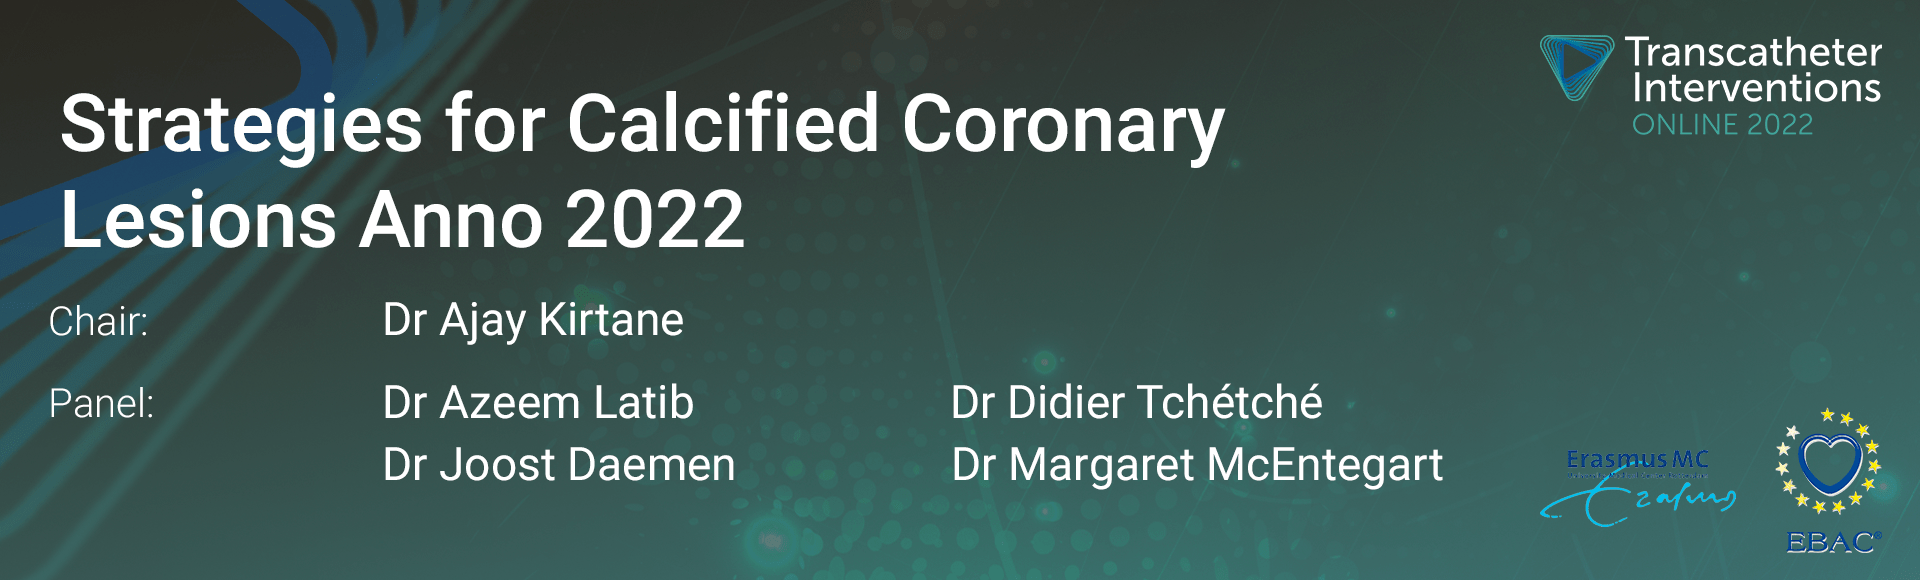 TIO 2022 - Session 2.1: Strategies For Calcified Coronary Lesions Anno 2022